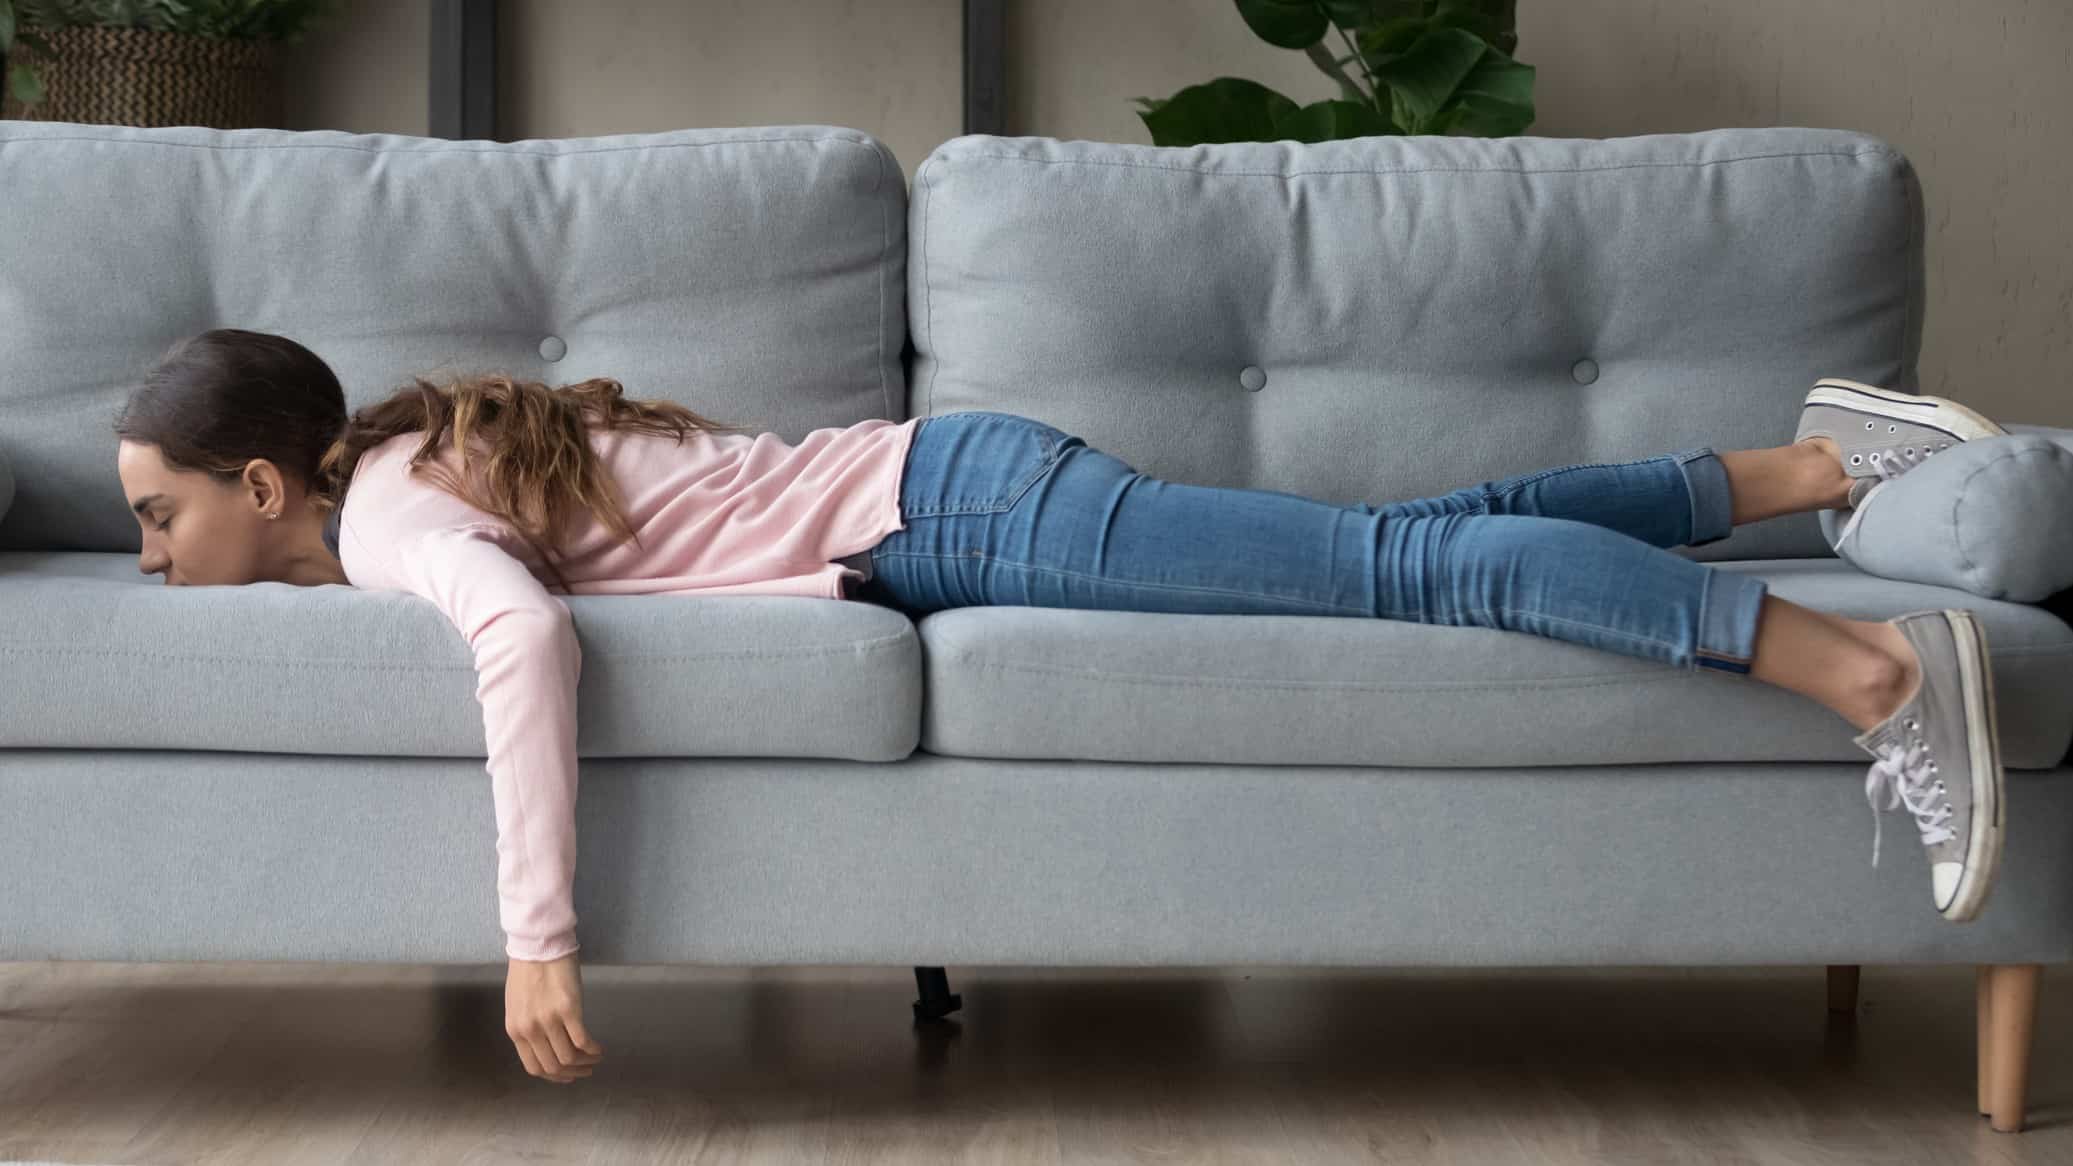 A woman lying face down on the couch, indicating a flat ASX share price